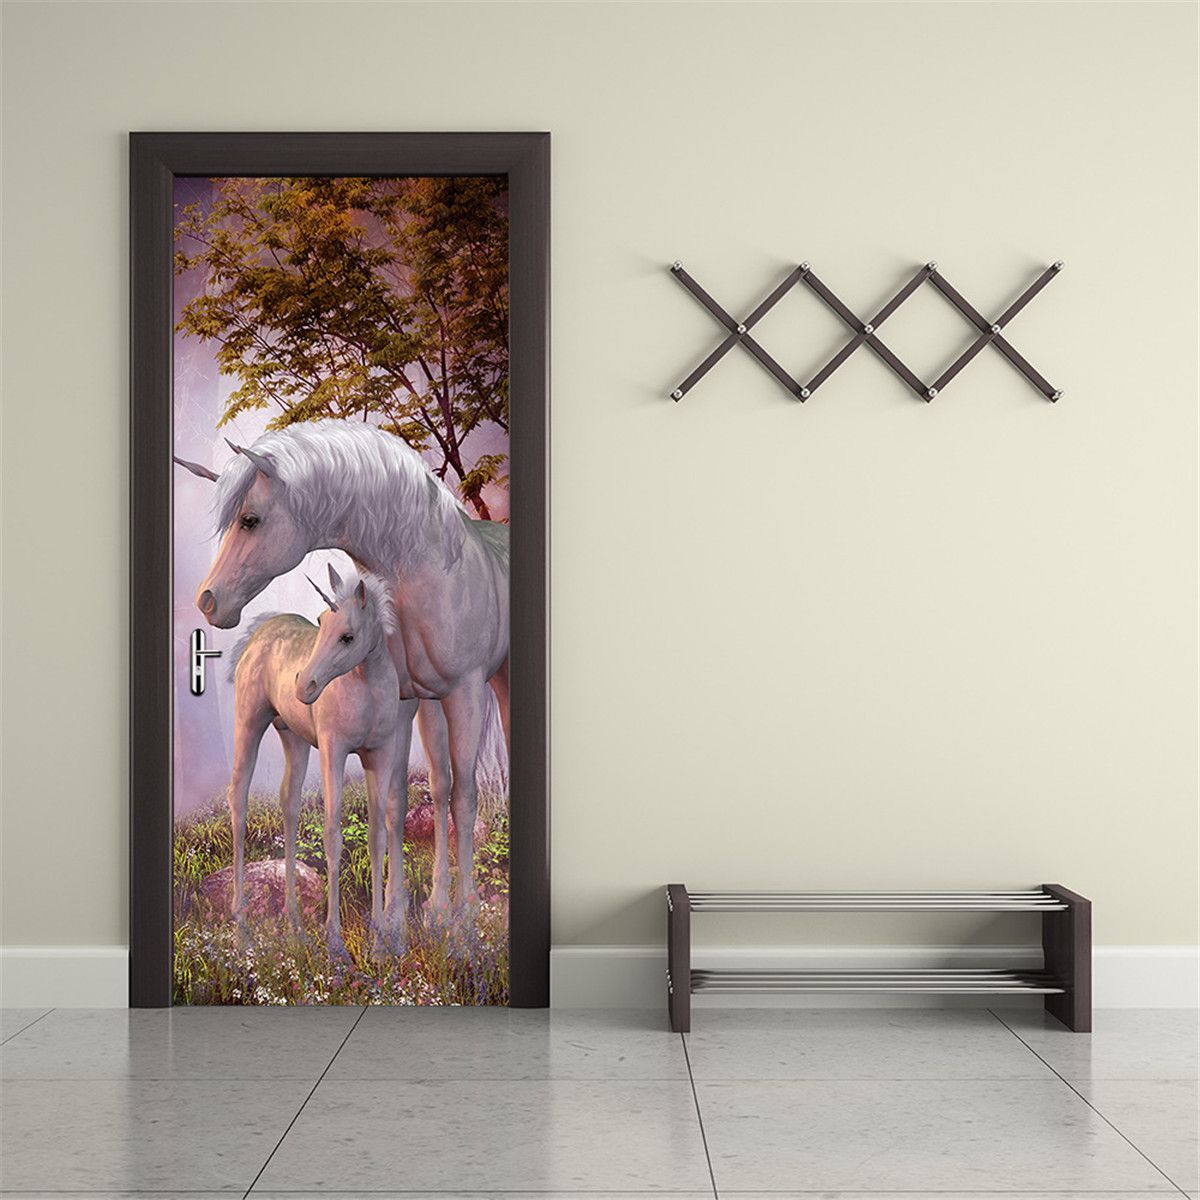 77200cm-PVC-3D-Door-Wall-Sticker-The-Unicorn-In-The-Forest-DIY-House-Decorations-1291303